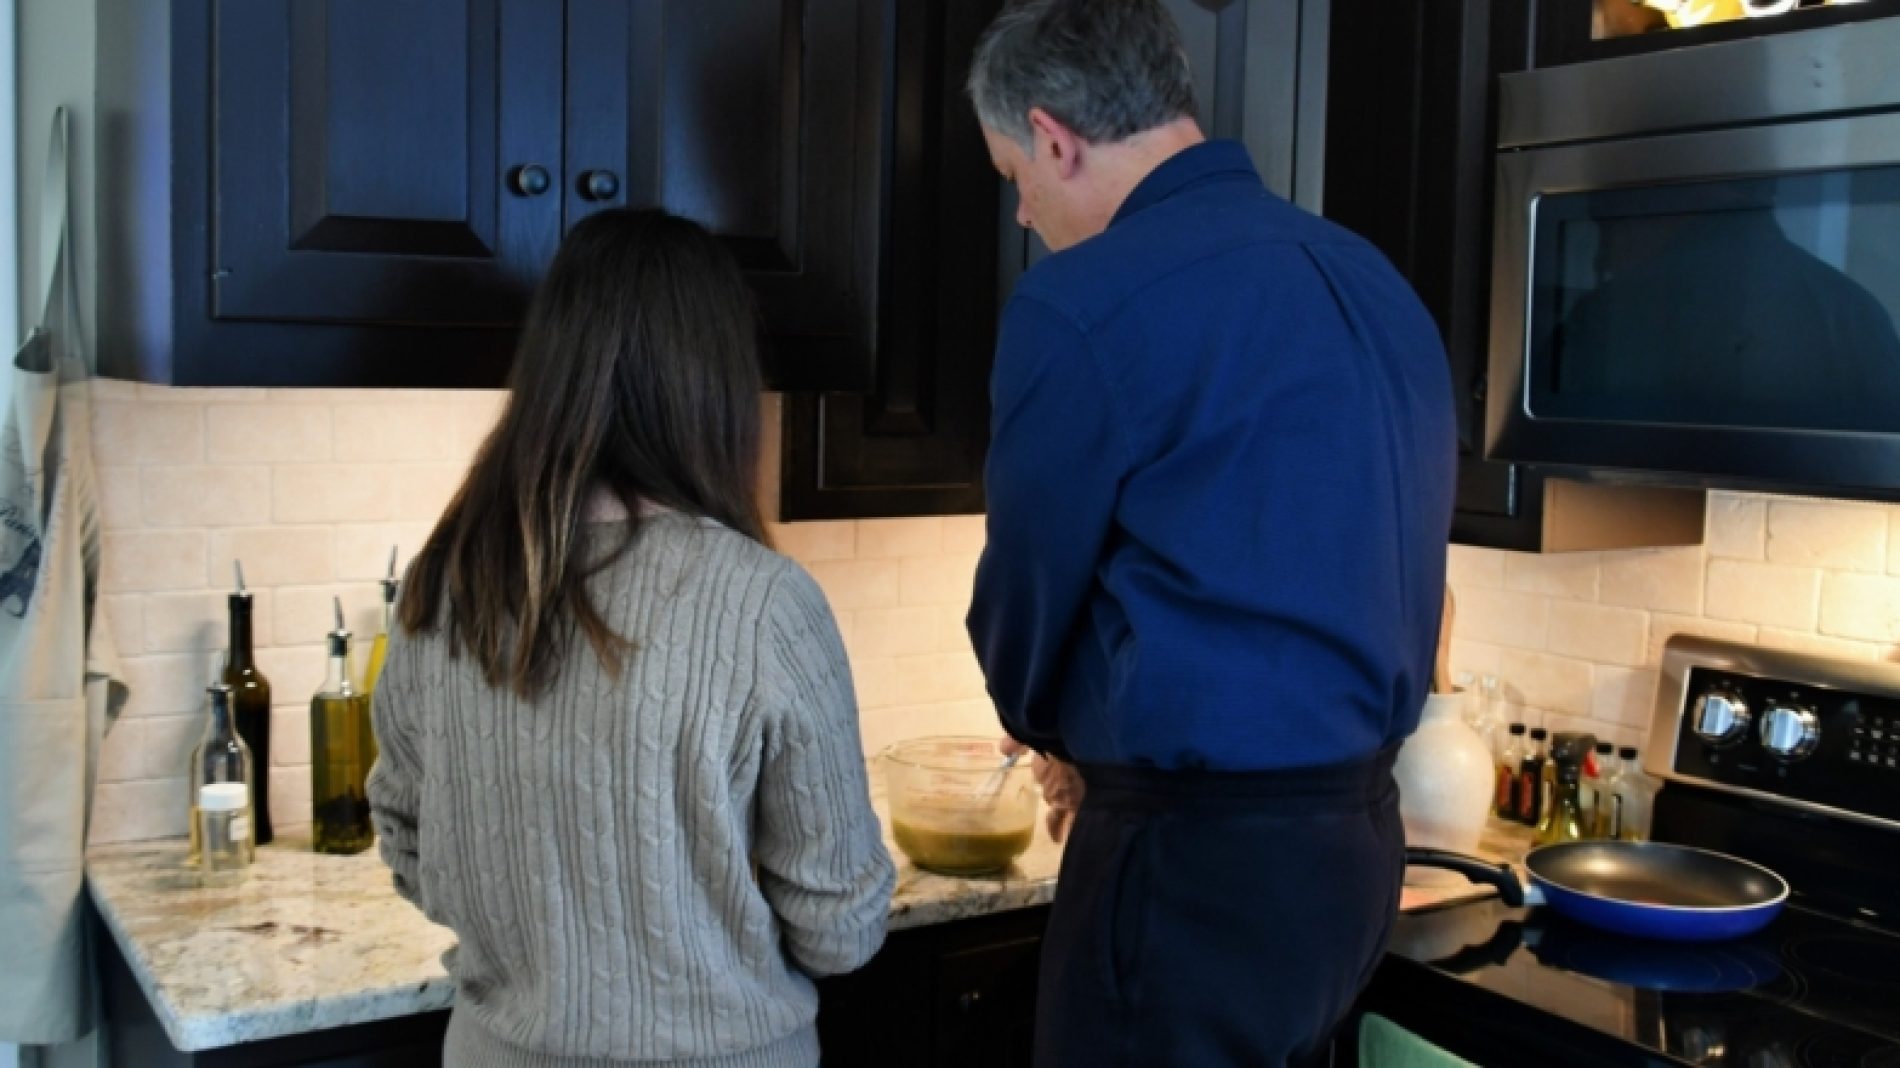 father-and-daughter-cooking-together-in-the-kitchen-parents-and-teenagers-real-people-human-element_t20_XzVbE3-rXWJzY